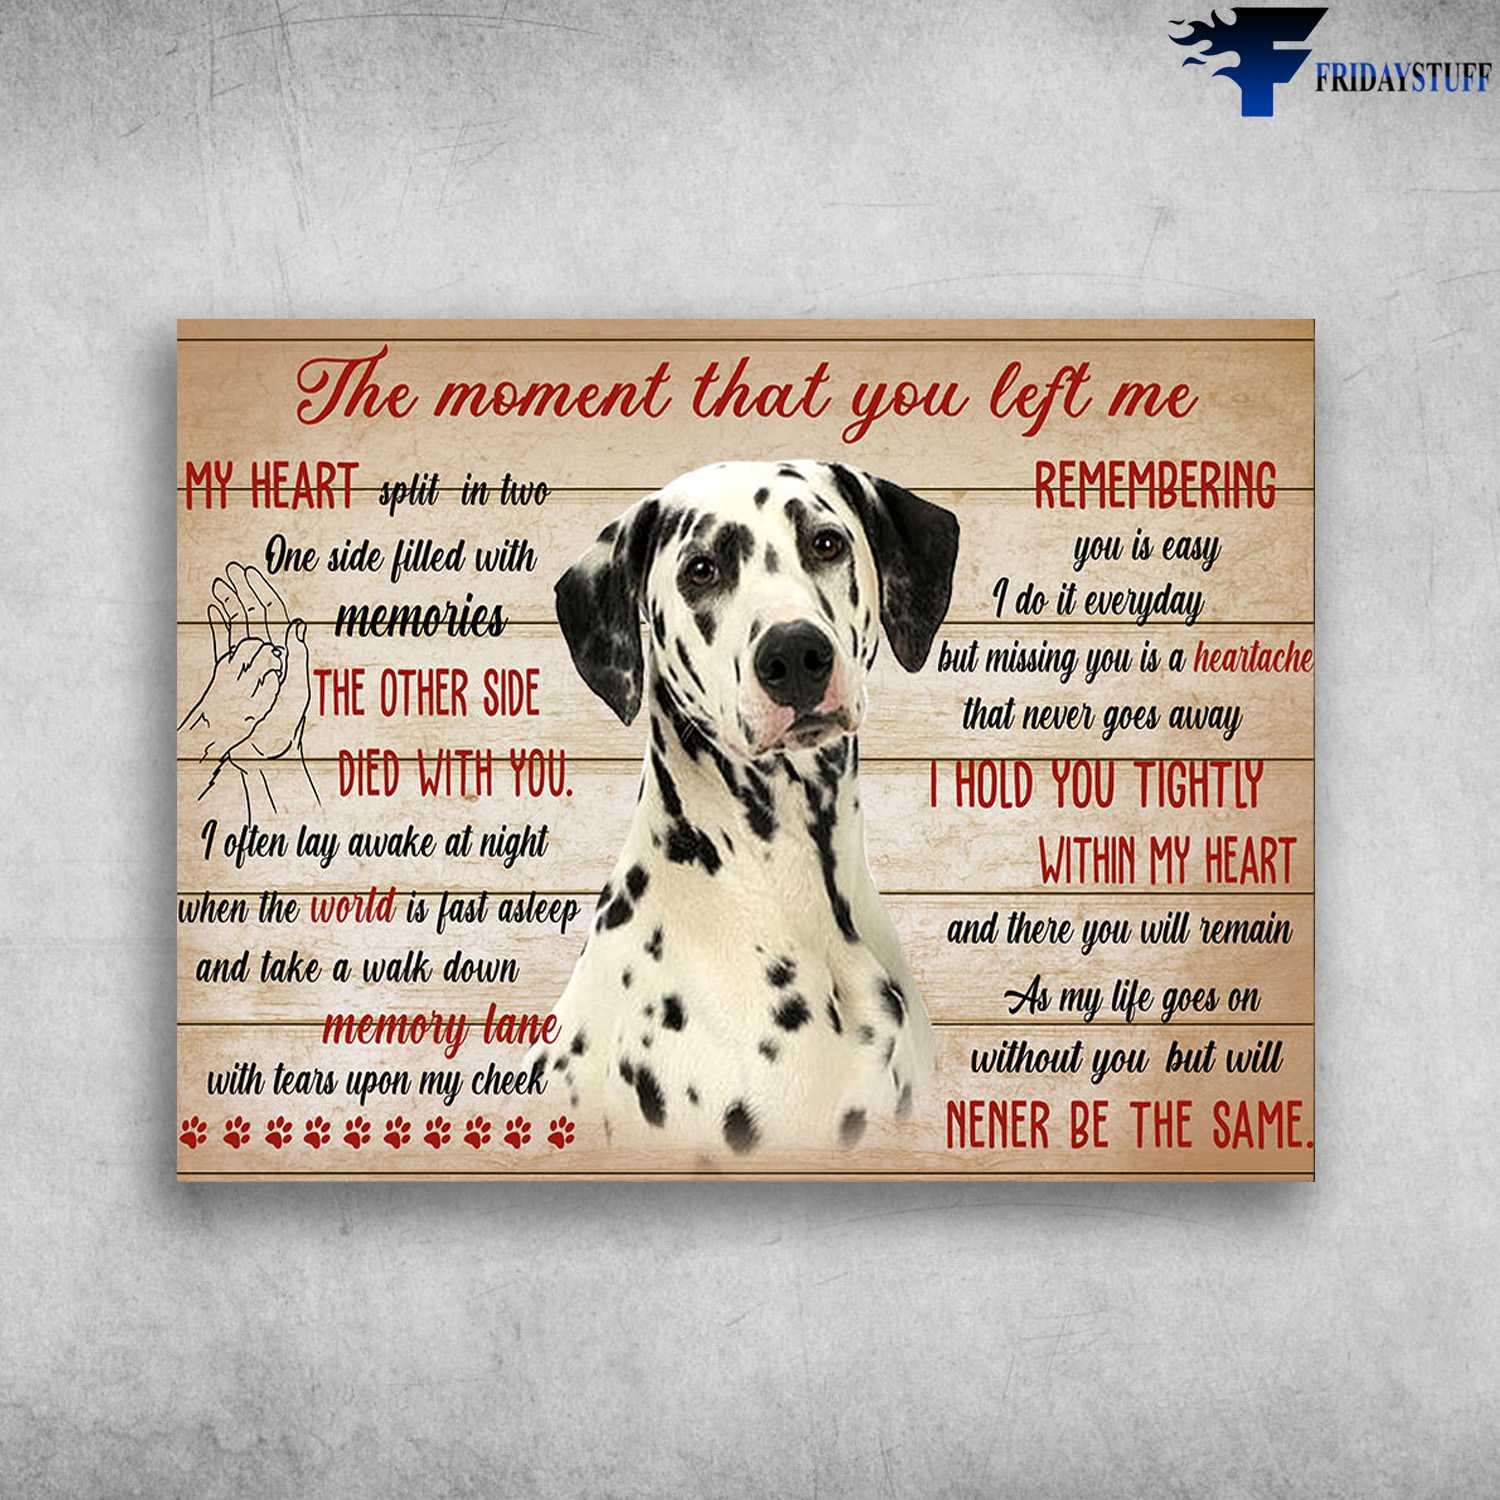 Dalmatian Dog, Dog Lover - The Moment That You Left Me, My Heart Split In Two, One Side Filled With Memoties, The Other Side, Died With You, I Often Lay Awake At Night, When World Is Fast Asleep